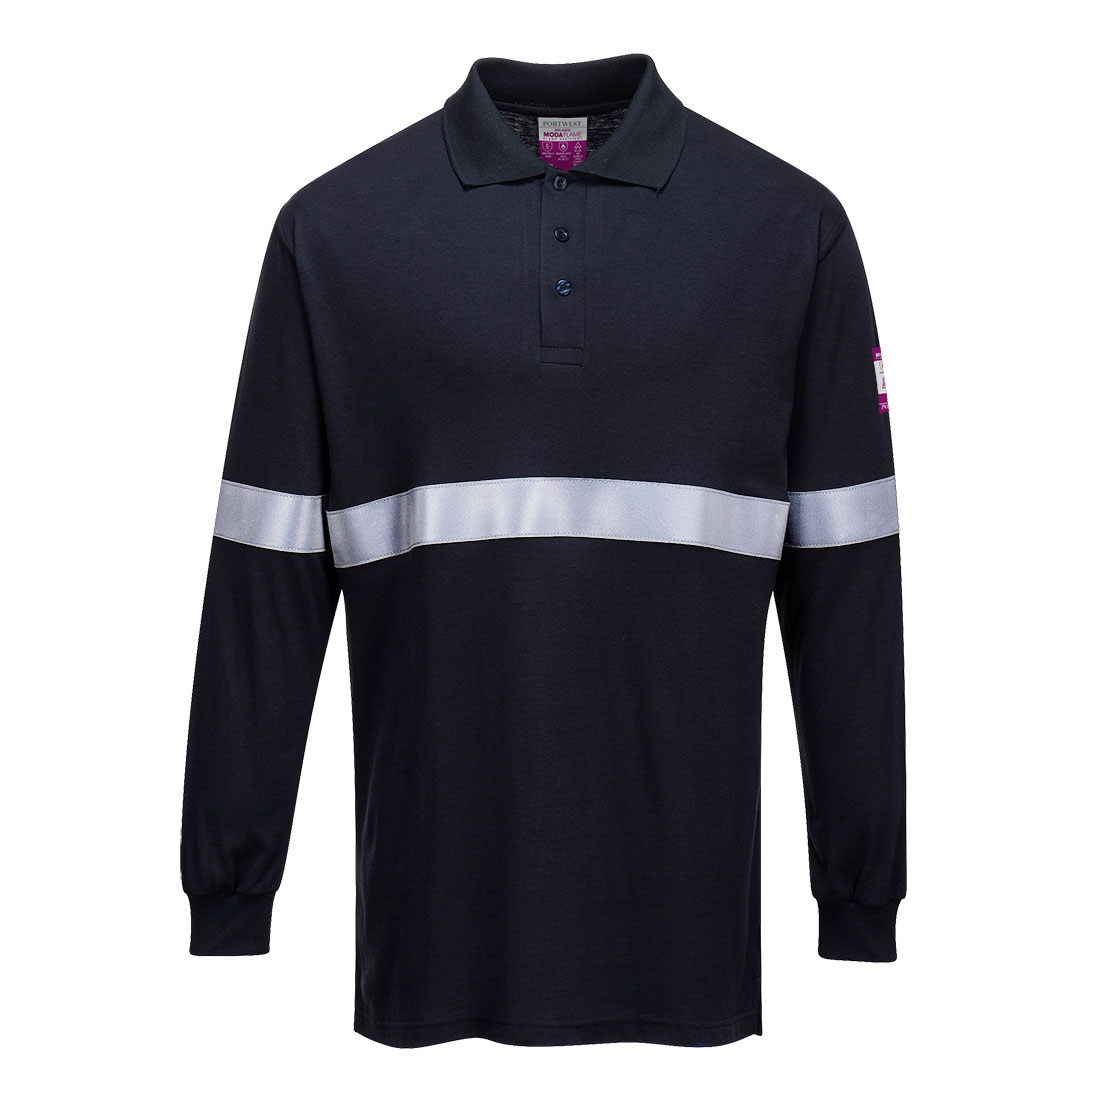 Flame Resistant Anti-Static Long Sleeve Polo Shirt with Reflective Tape - Navy